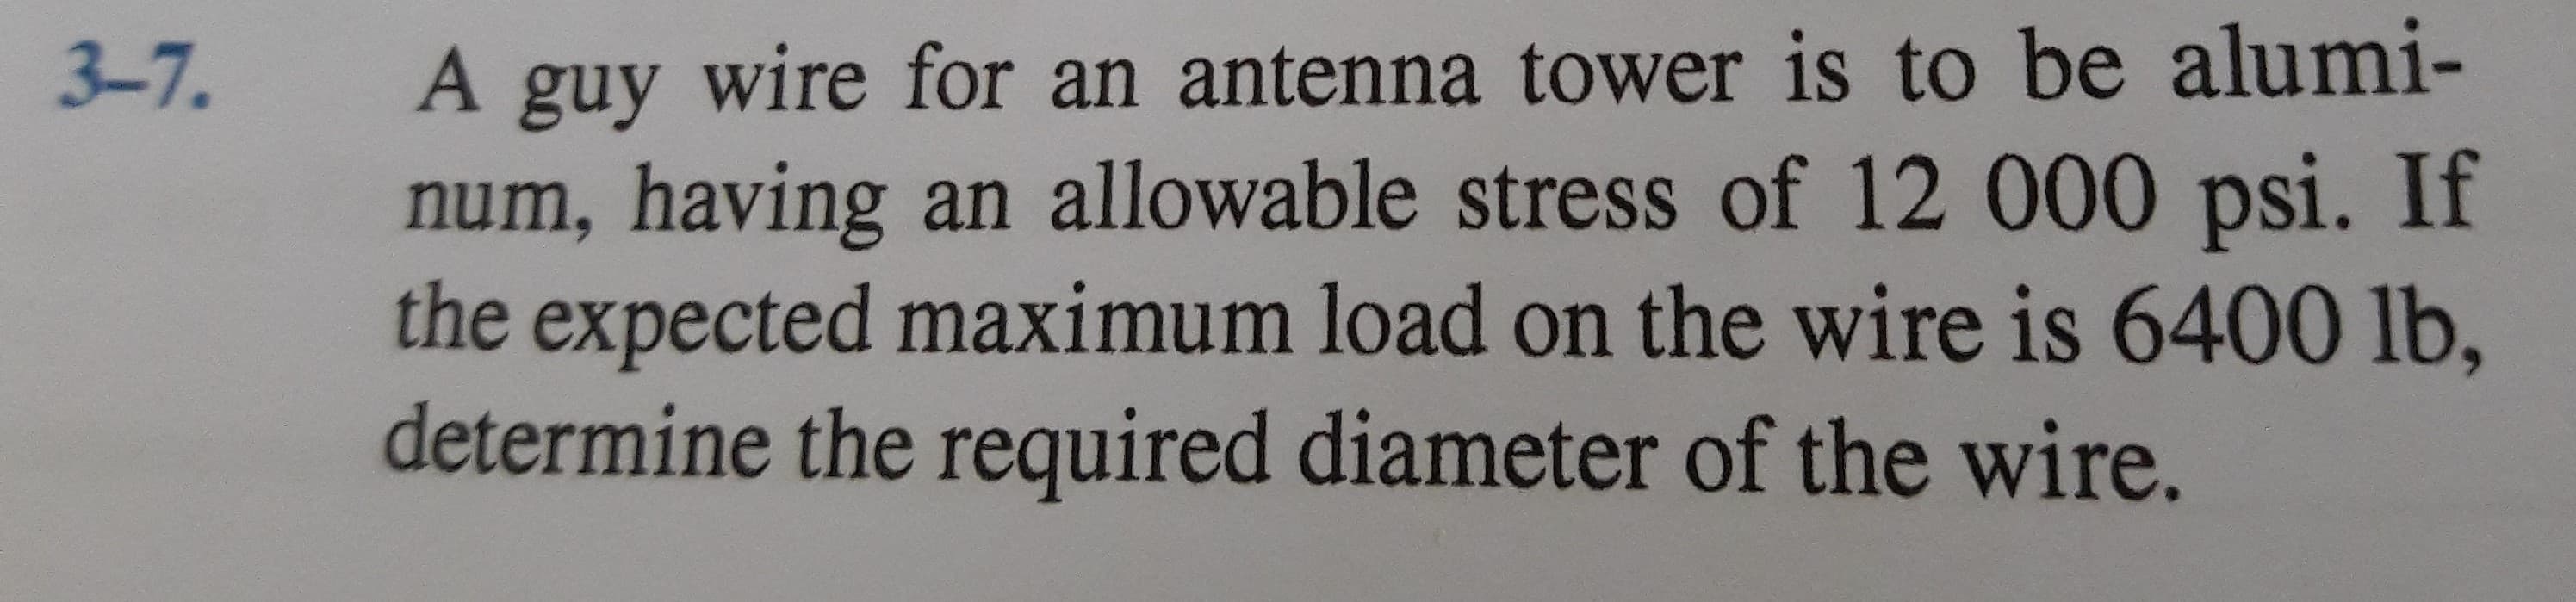 A guy wire for an antenna tower is to be alumi-
num, having an allowable stress of 12 000 psi. If
the expected maximum load on the wire is 6400 lb,
determine the required diameter of the wire.
3-7.
